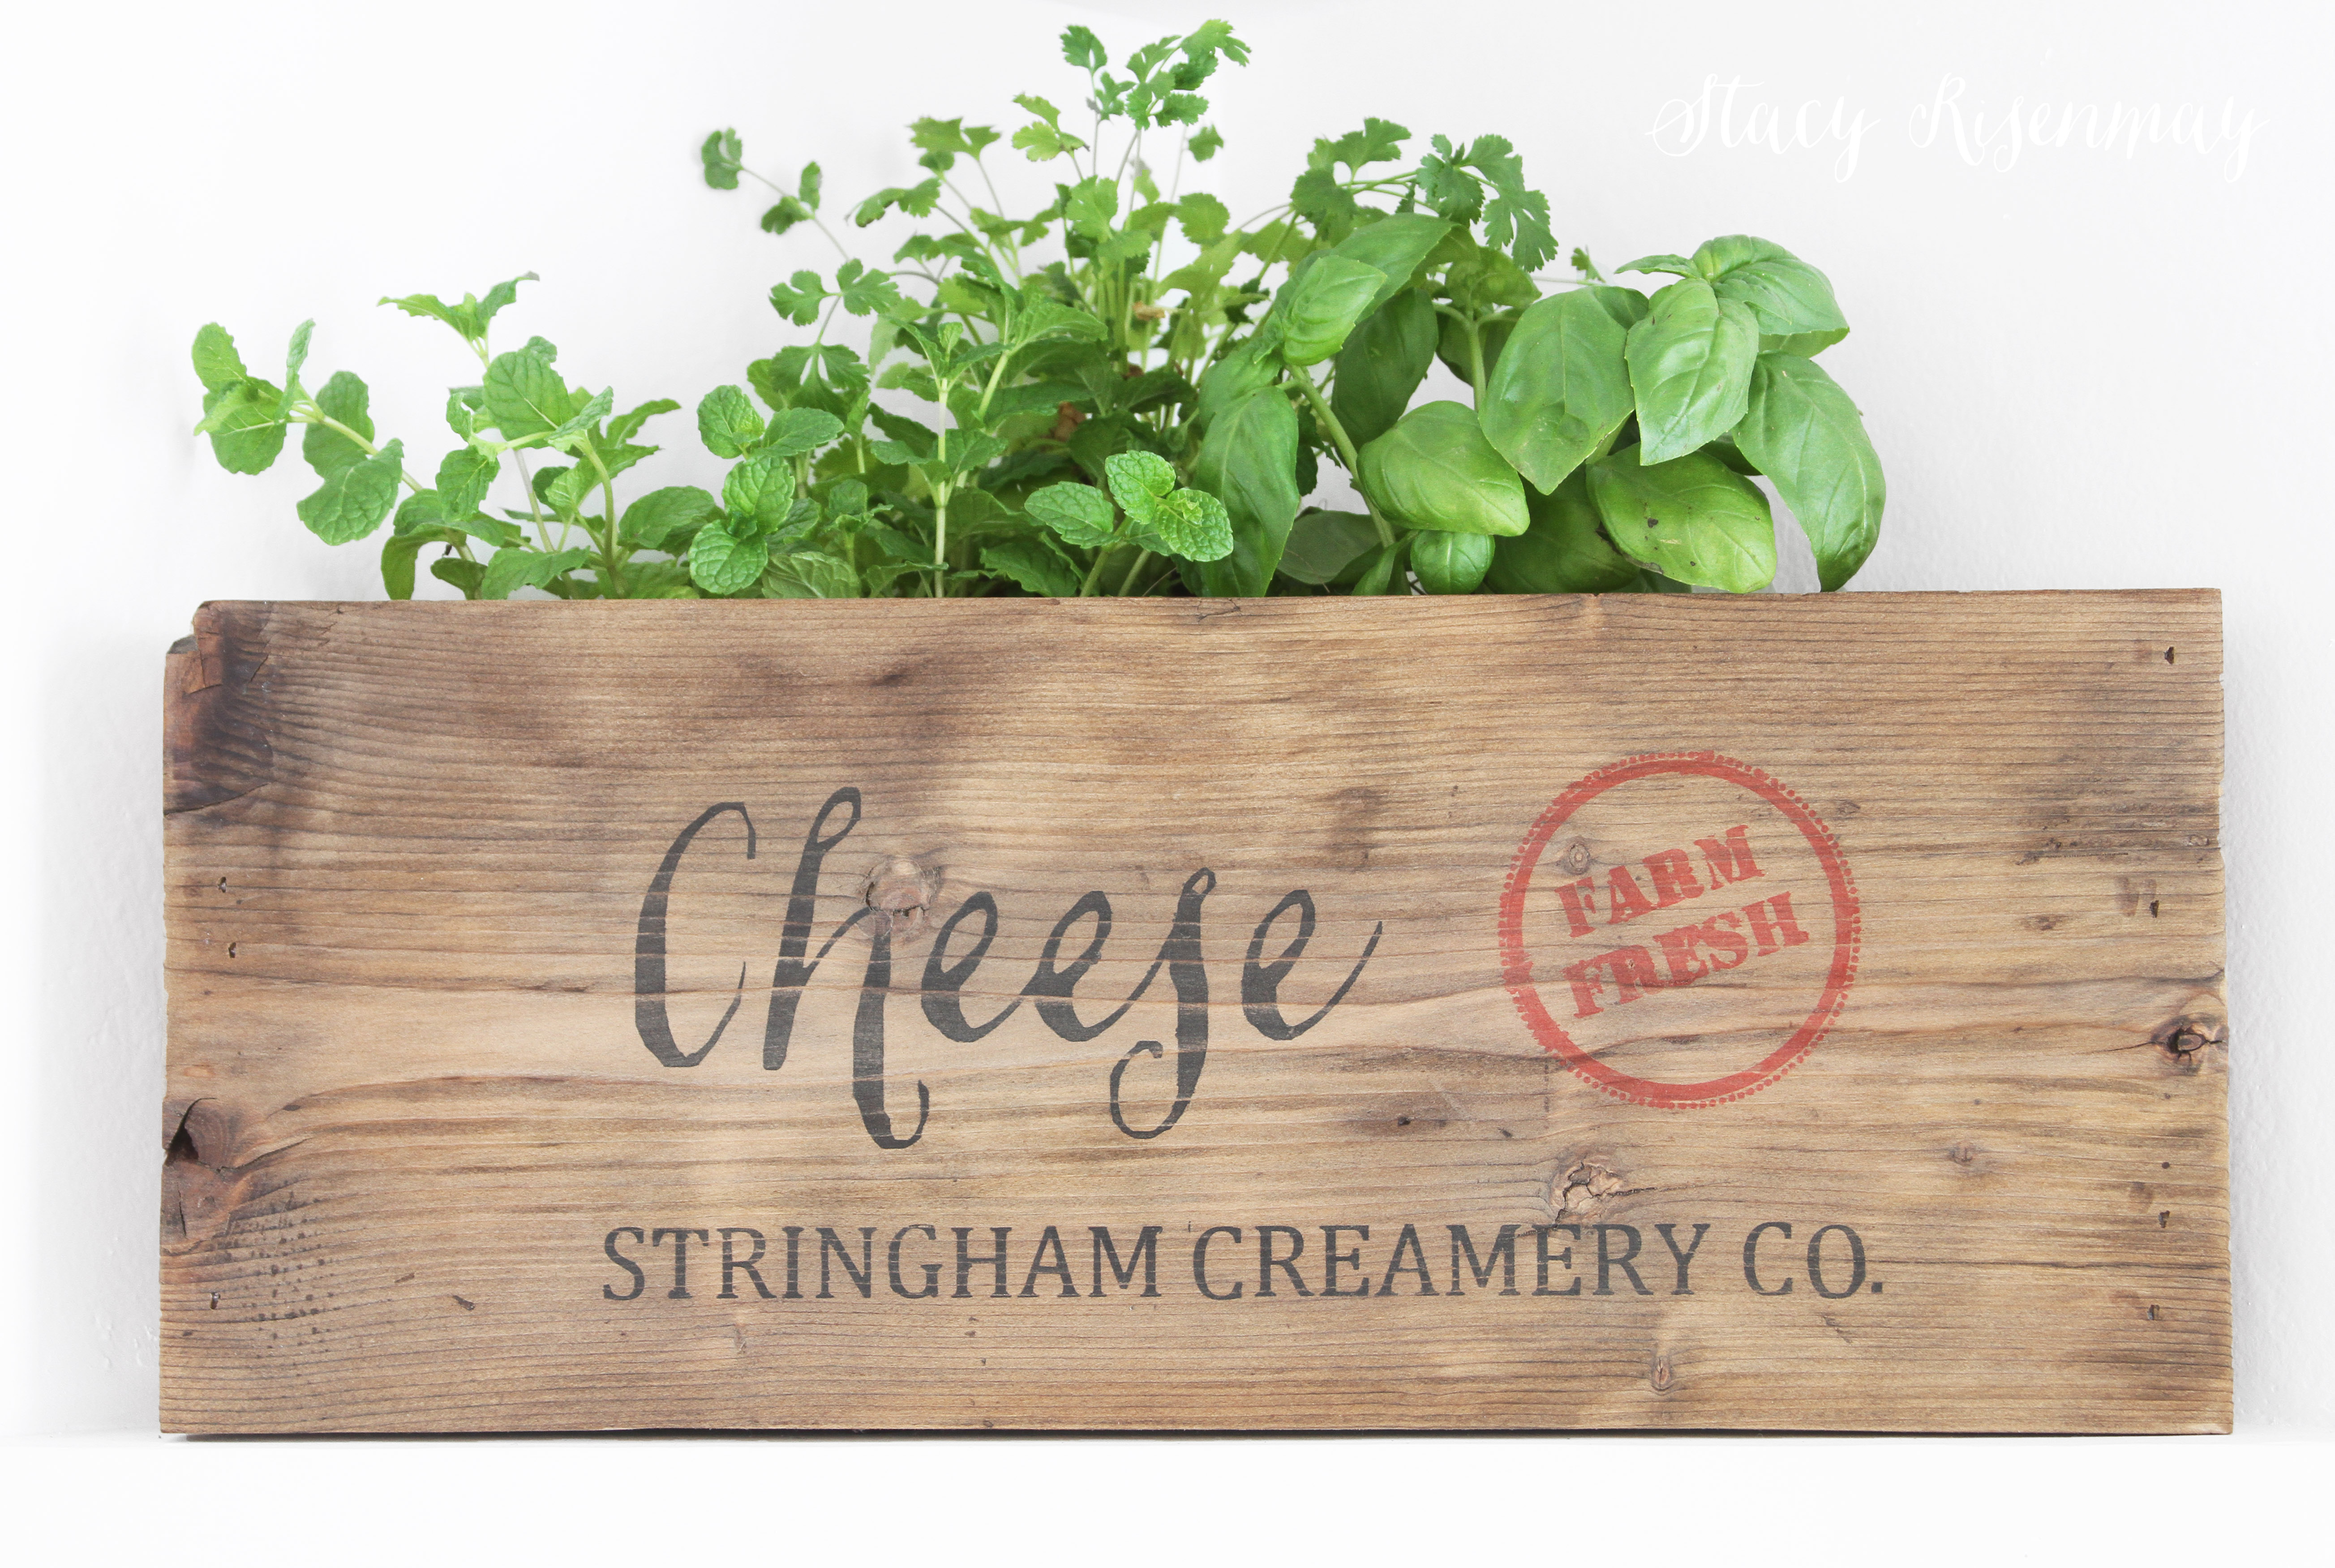 cheese crate used as planter for herbs